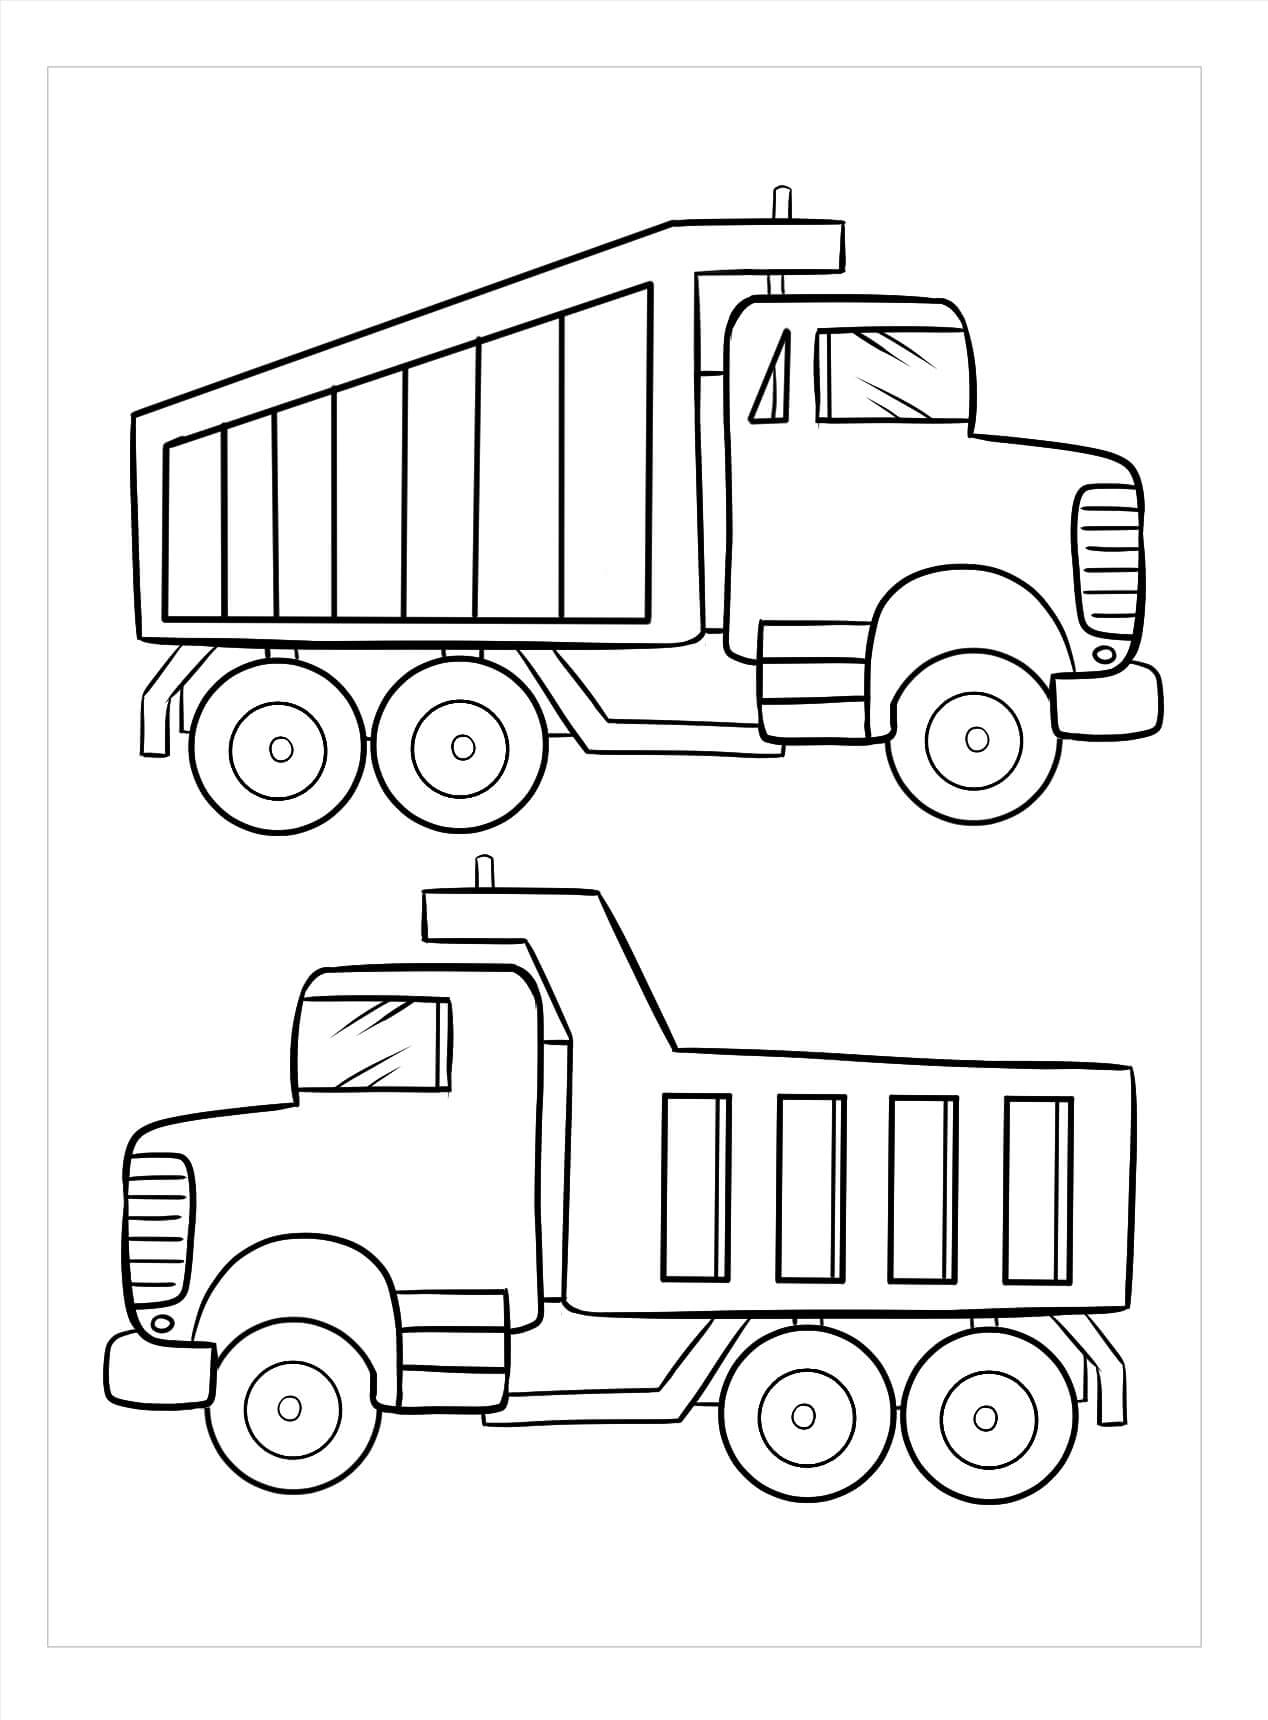 Deux Camions coloring page